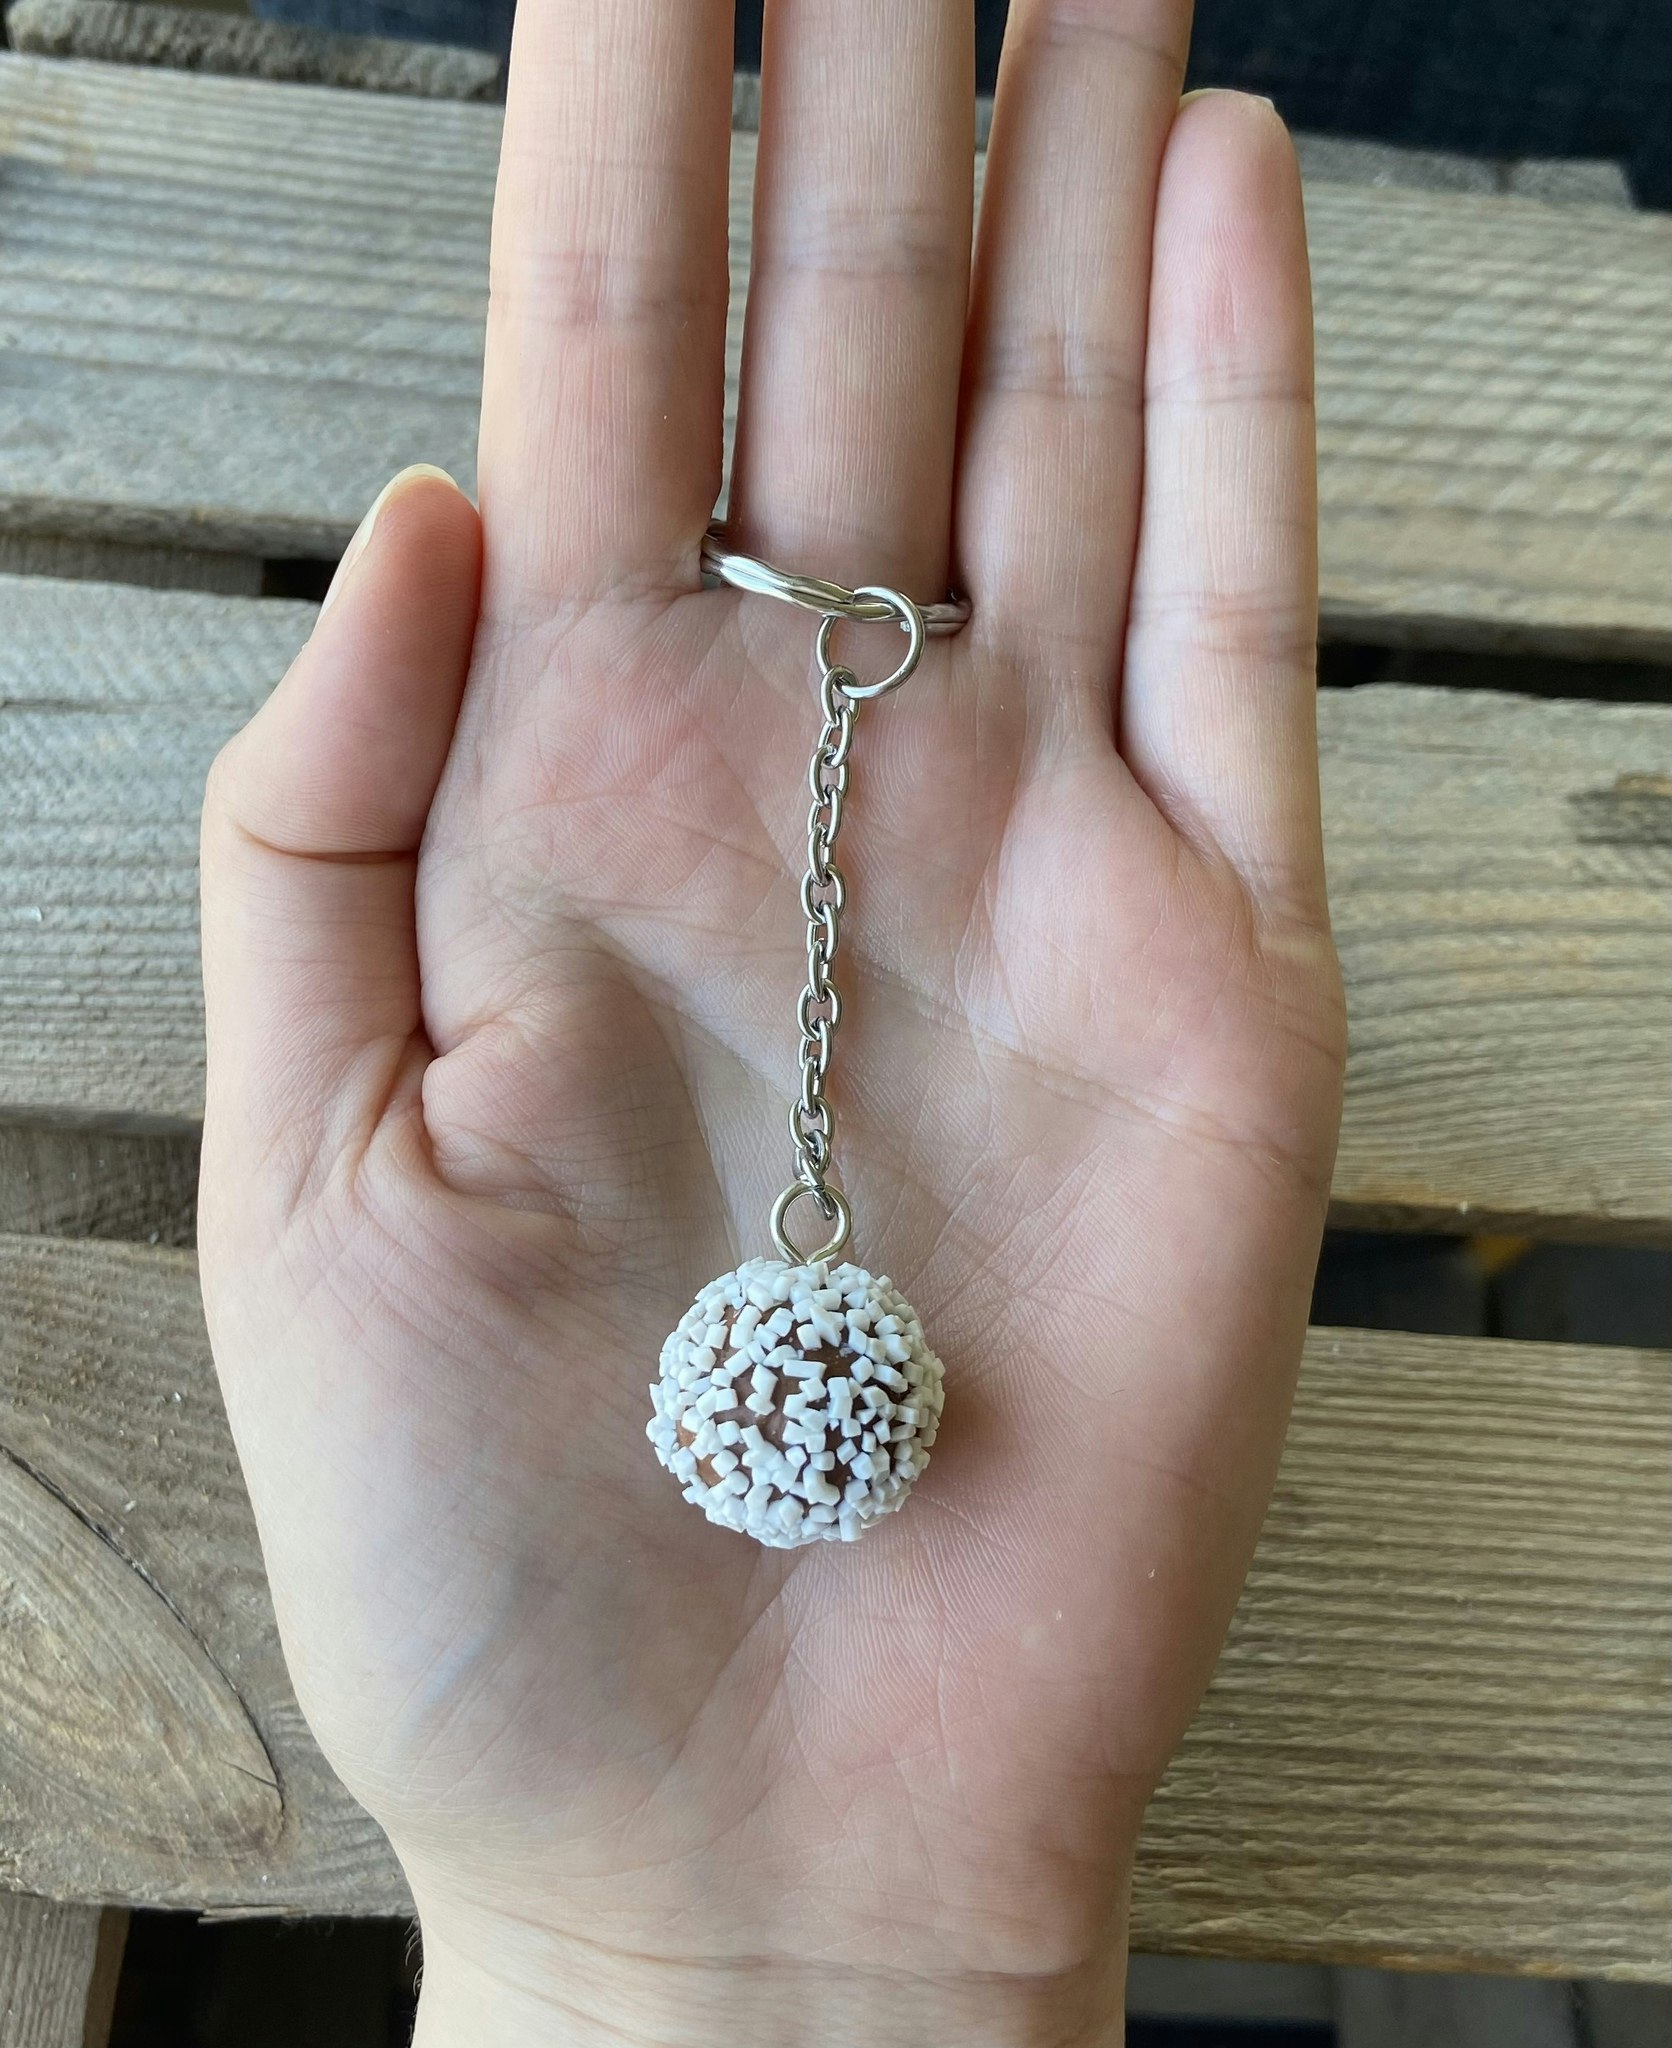 Keychain, chocolate ball with pearl sugar (without bite)